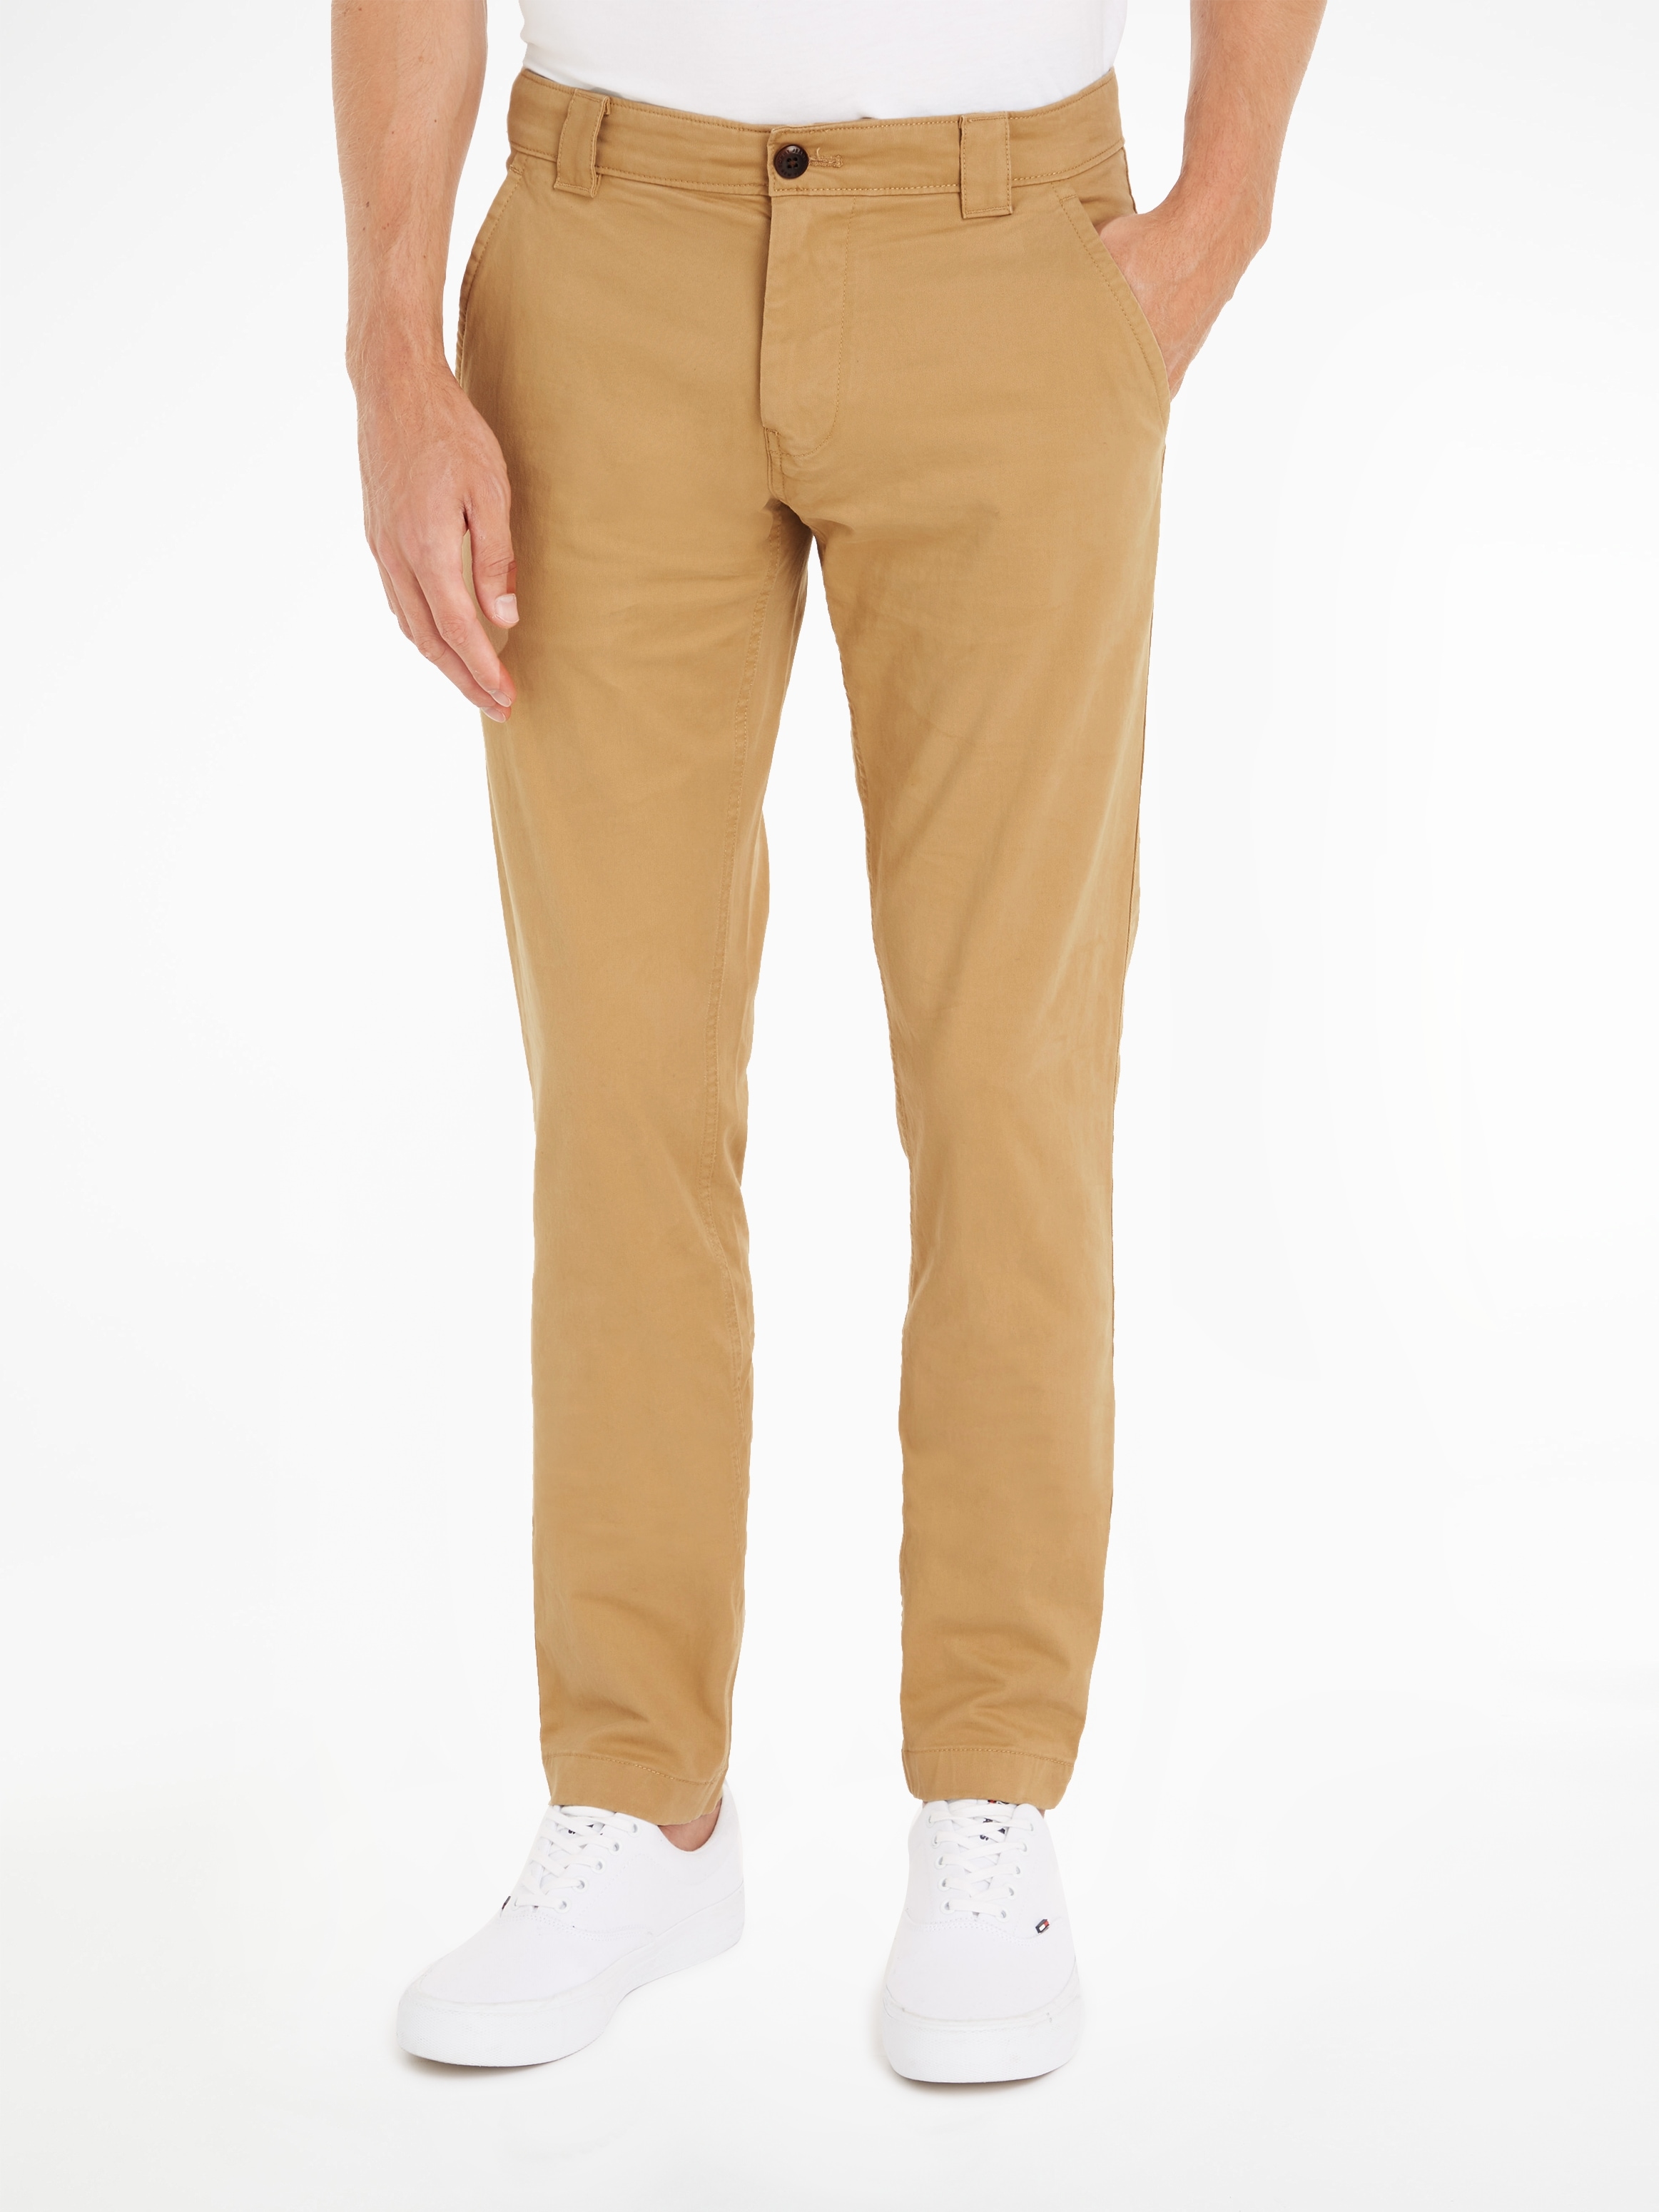 Tommy Jeans Chinohose "TJM SCANTON CHINO PANT", mit Markenlabel